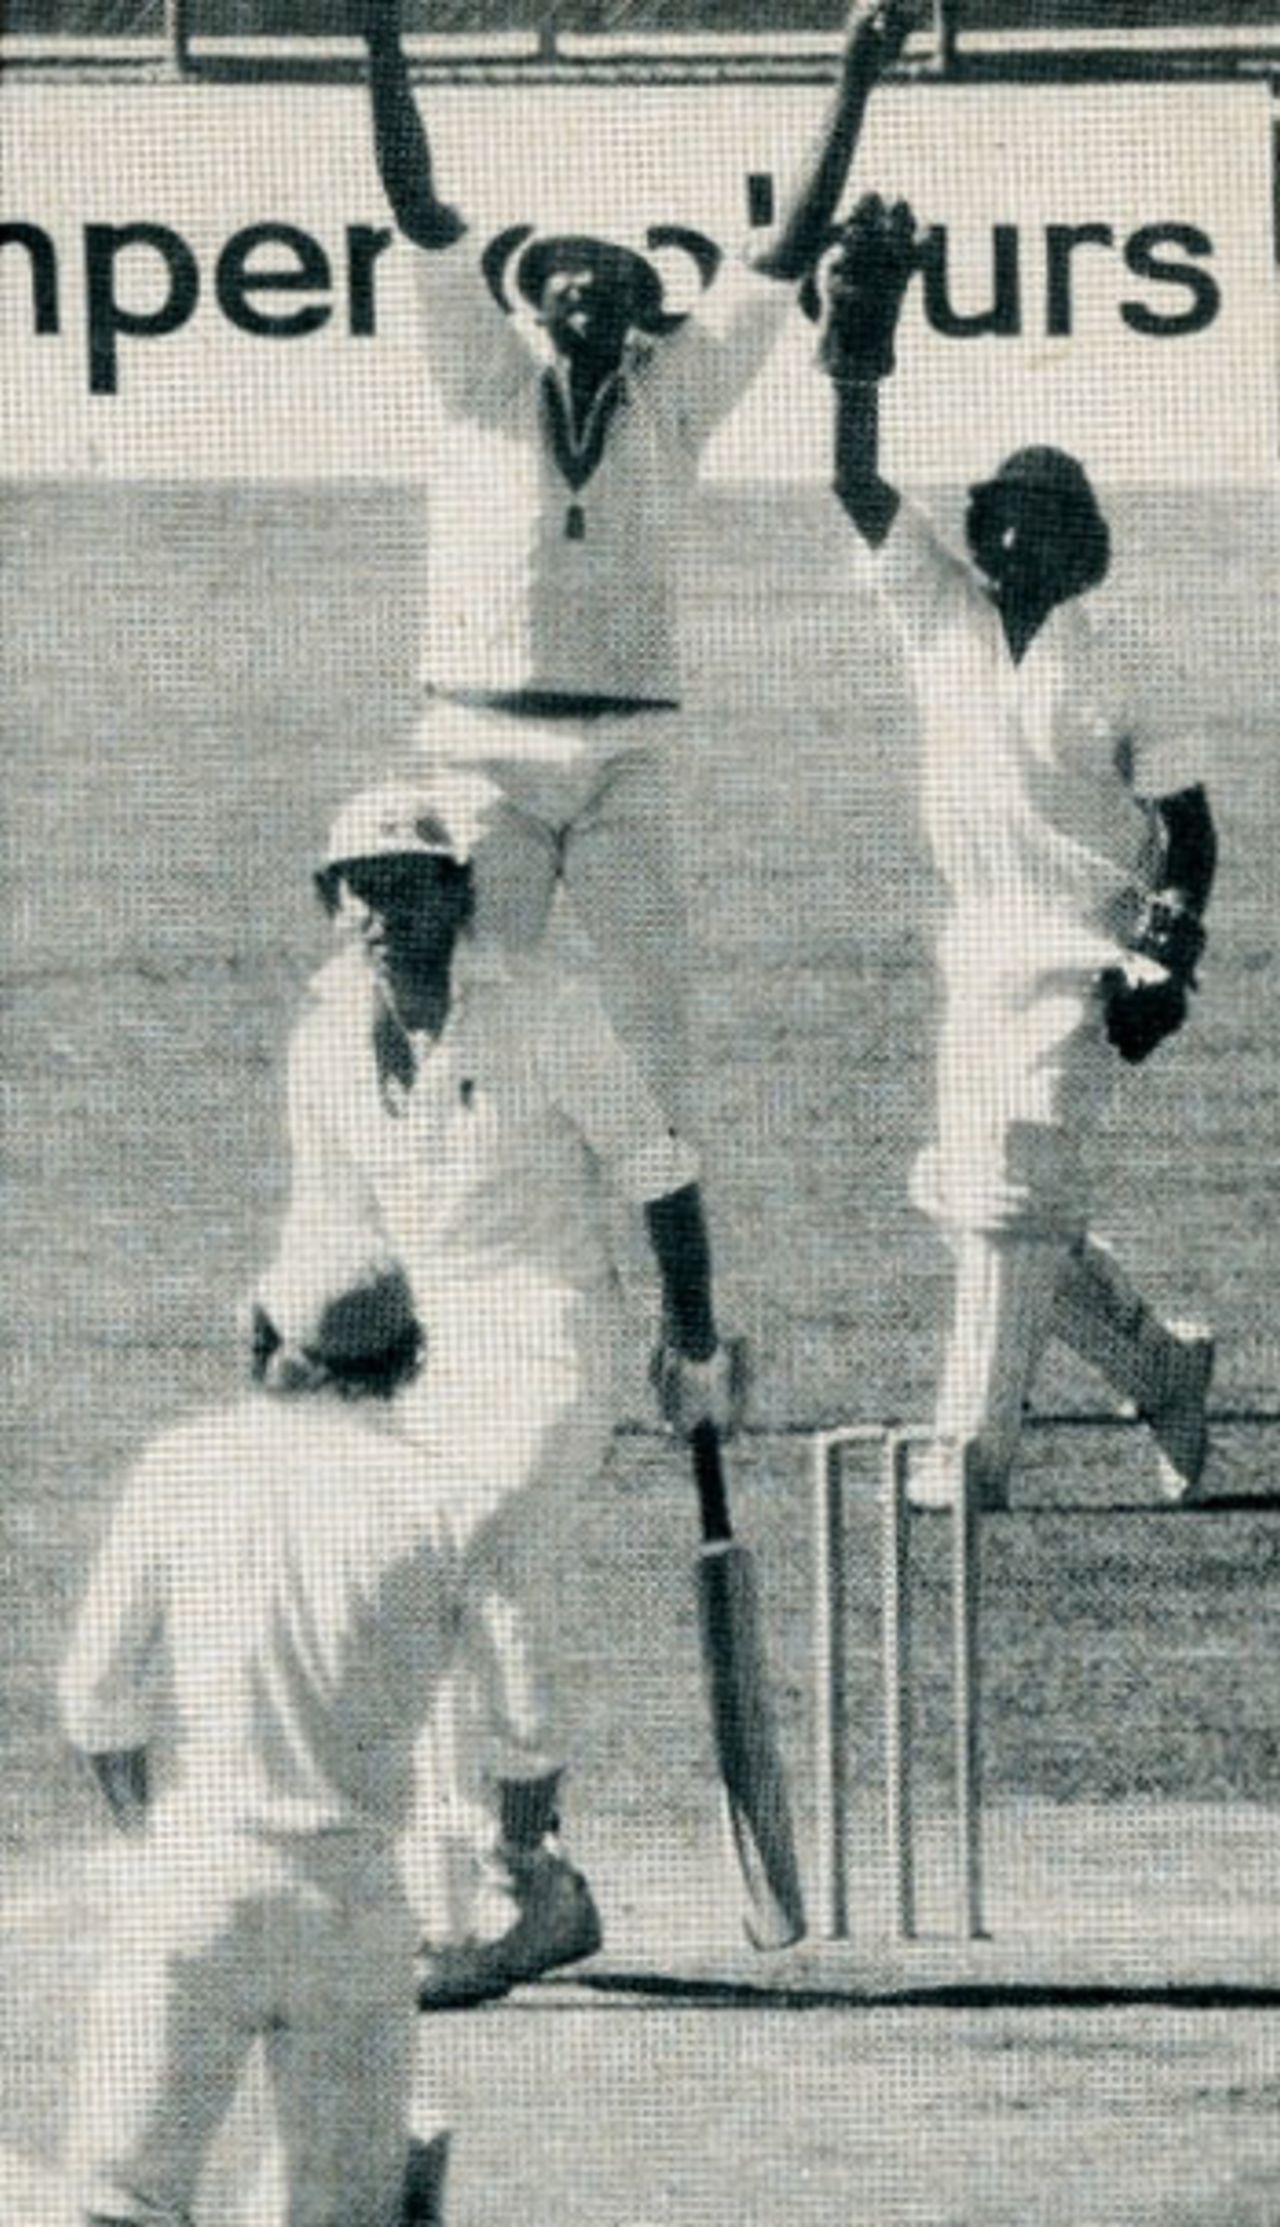 Ian Chappell is caught behind off Andy Roberts, WSC Australia v WSC West Indies, Adelaide, December 3, 1977